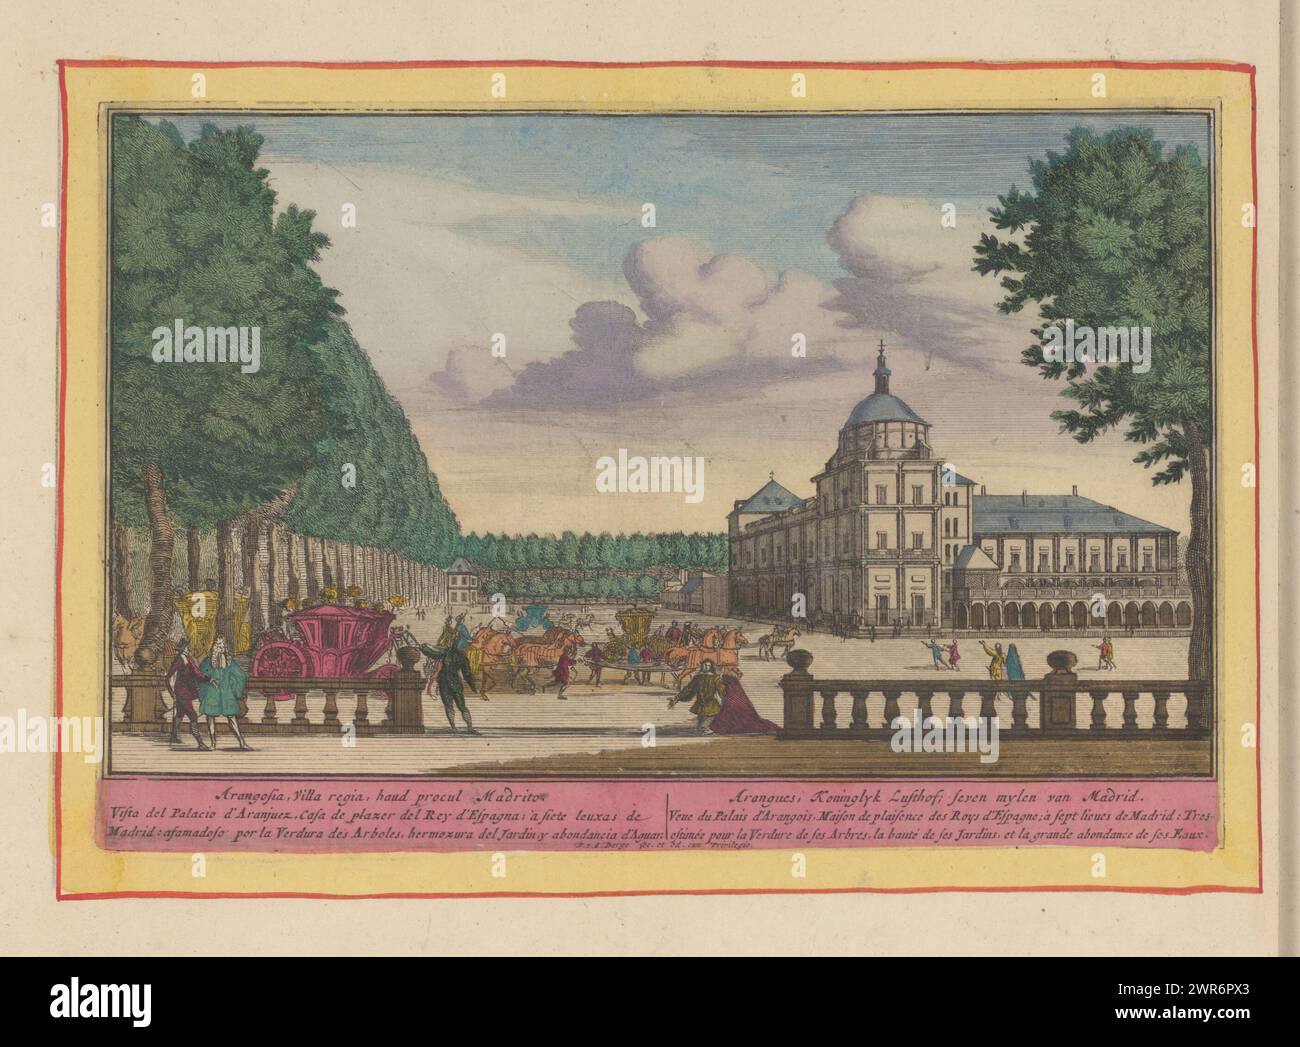 Royal Palace of Aranjuez, Aranguez, Koninklyk Lusthof, seven miles of Madrid (title on object), Theatrum Hispaniae (...) (series title), The Royal Palace of Aranjuez. Carriages in the foreground. Below the performance a title in Latin, Spanish, Dutch and French. Print is part of an album., print maker: Pieter van den Berge, publisher: Pieter van den Berge, Staten van Holland en West-Friesland, print maker: Amsterdam, publisher: Amsterdam, The Hague, 1694 - 1737, paper, etching, height 172 mm × width 257 mm, print Stock Photo